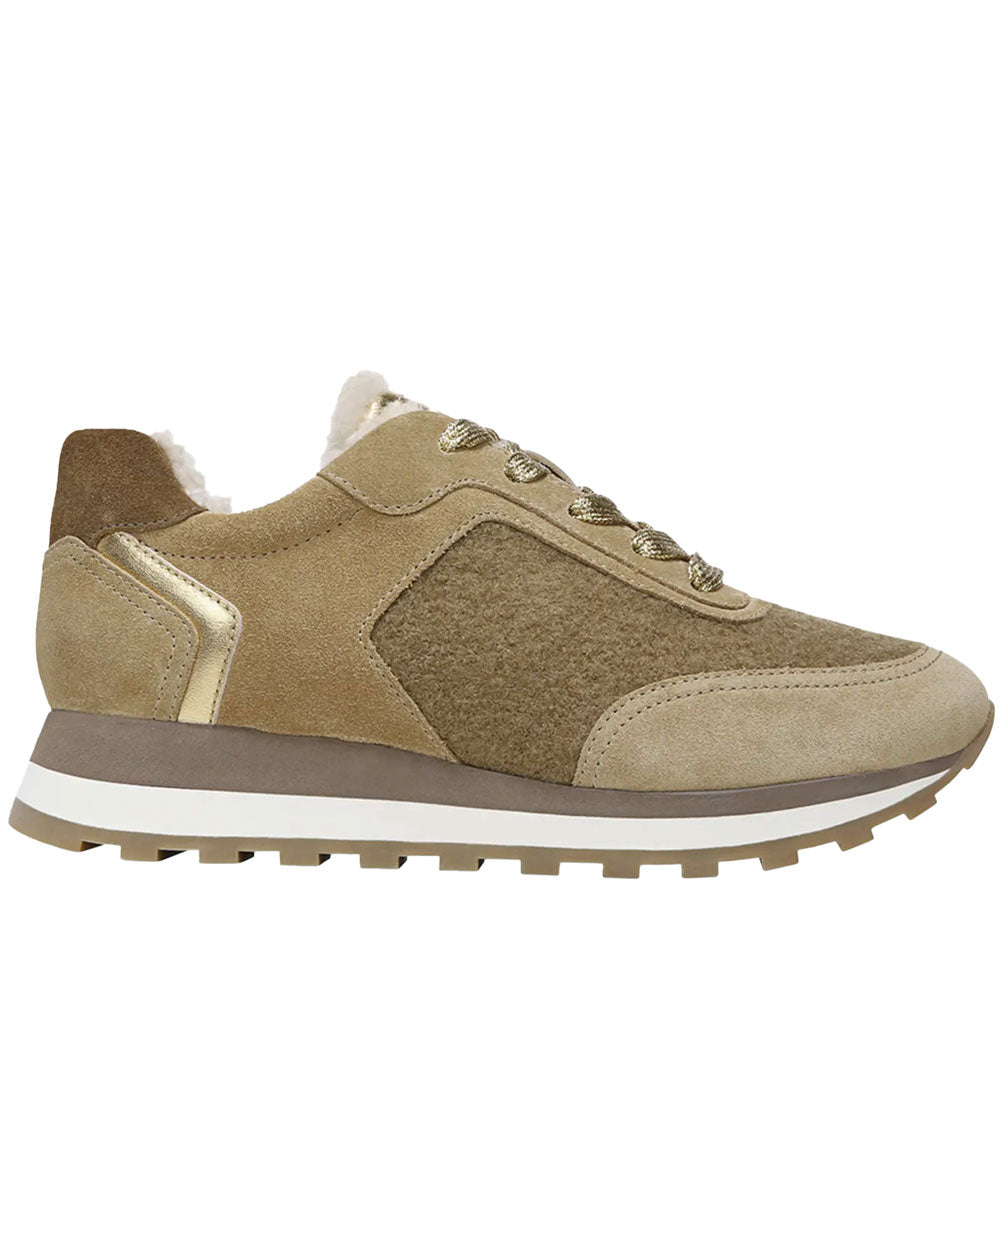 Hartley Mixed Leather Shearling Sneaker in Sand